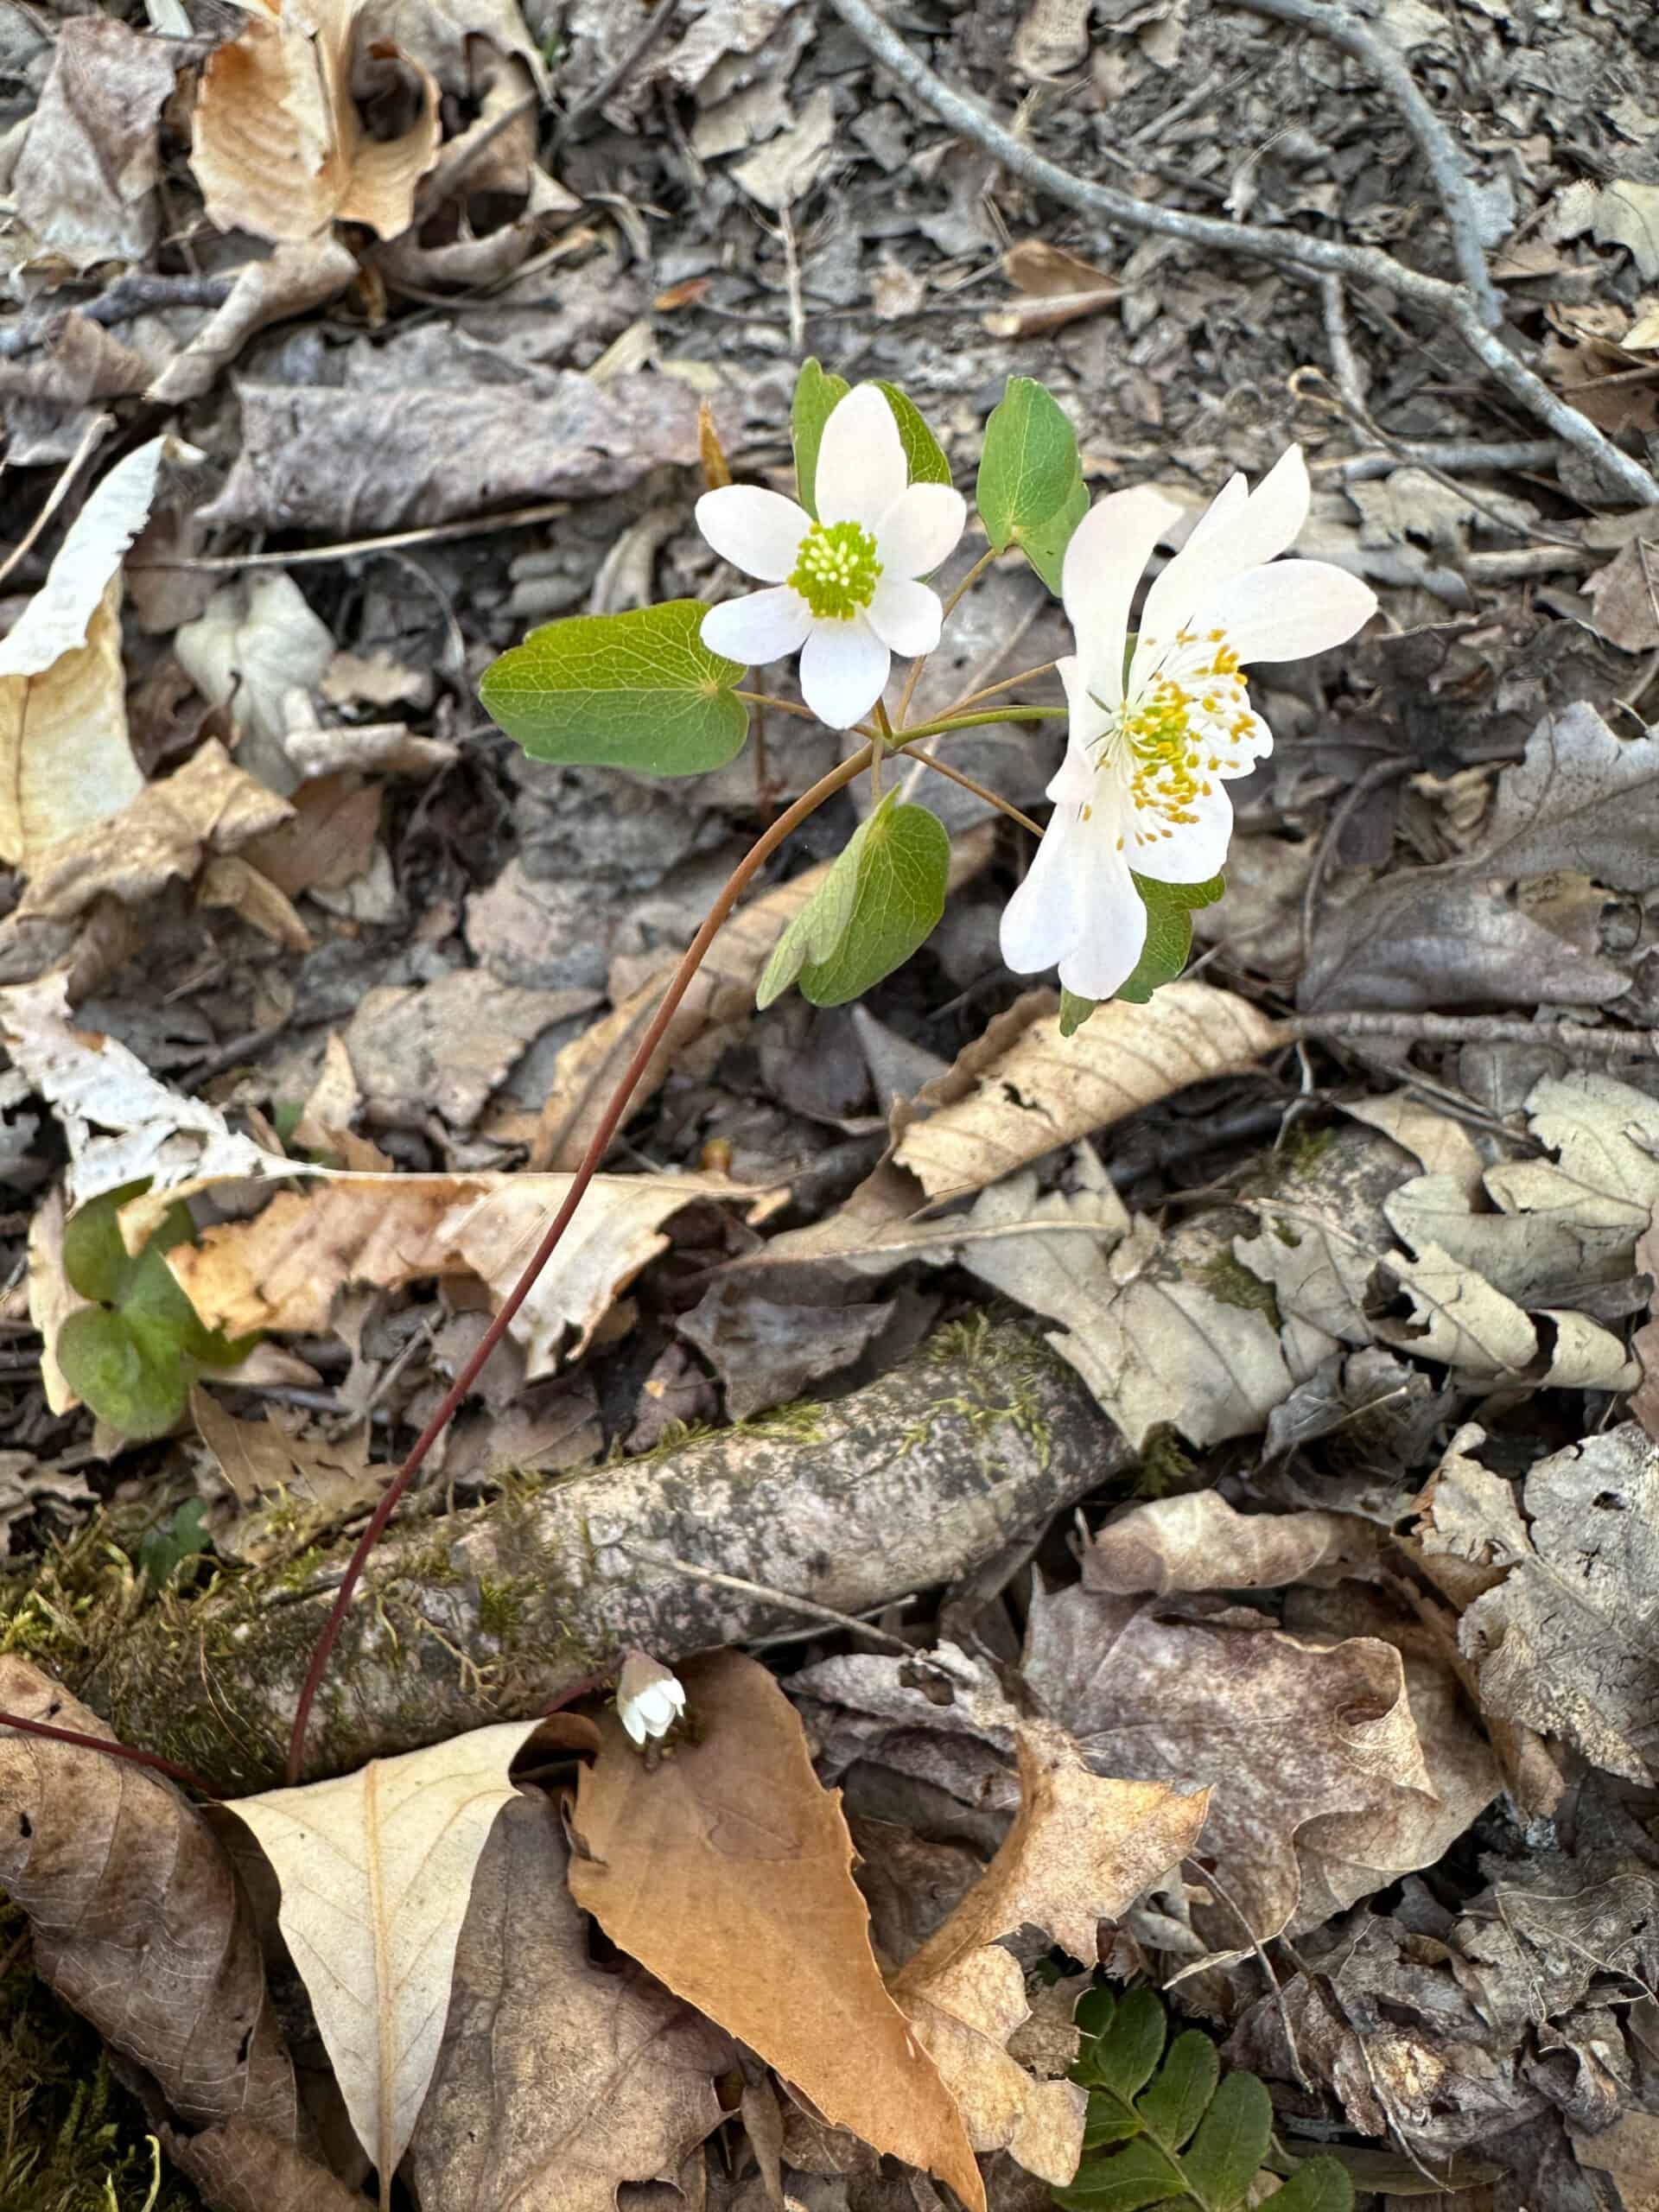 Small white six-petaled flowers of rue-anemone